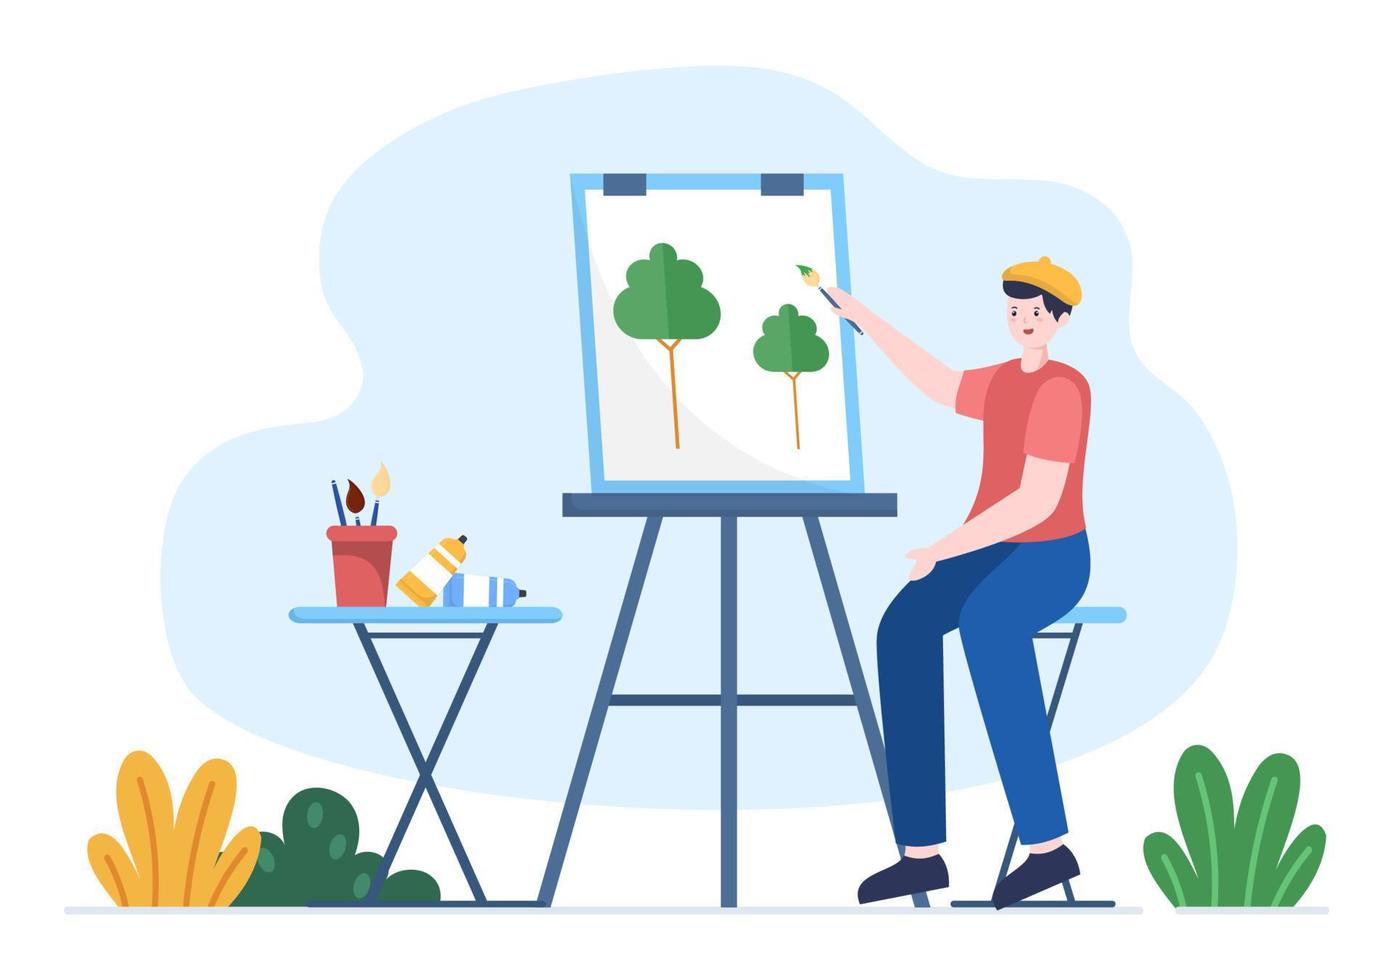 Painting Outdoors Flat Illustration with Someone who Paints using Easel, Canvas, Brushes and Watercolor for Poster or Workshops Designs vector